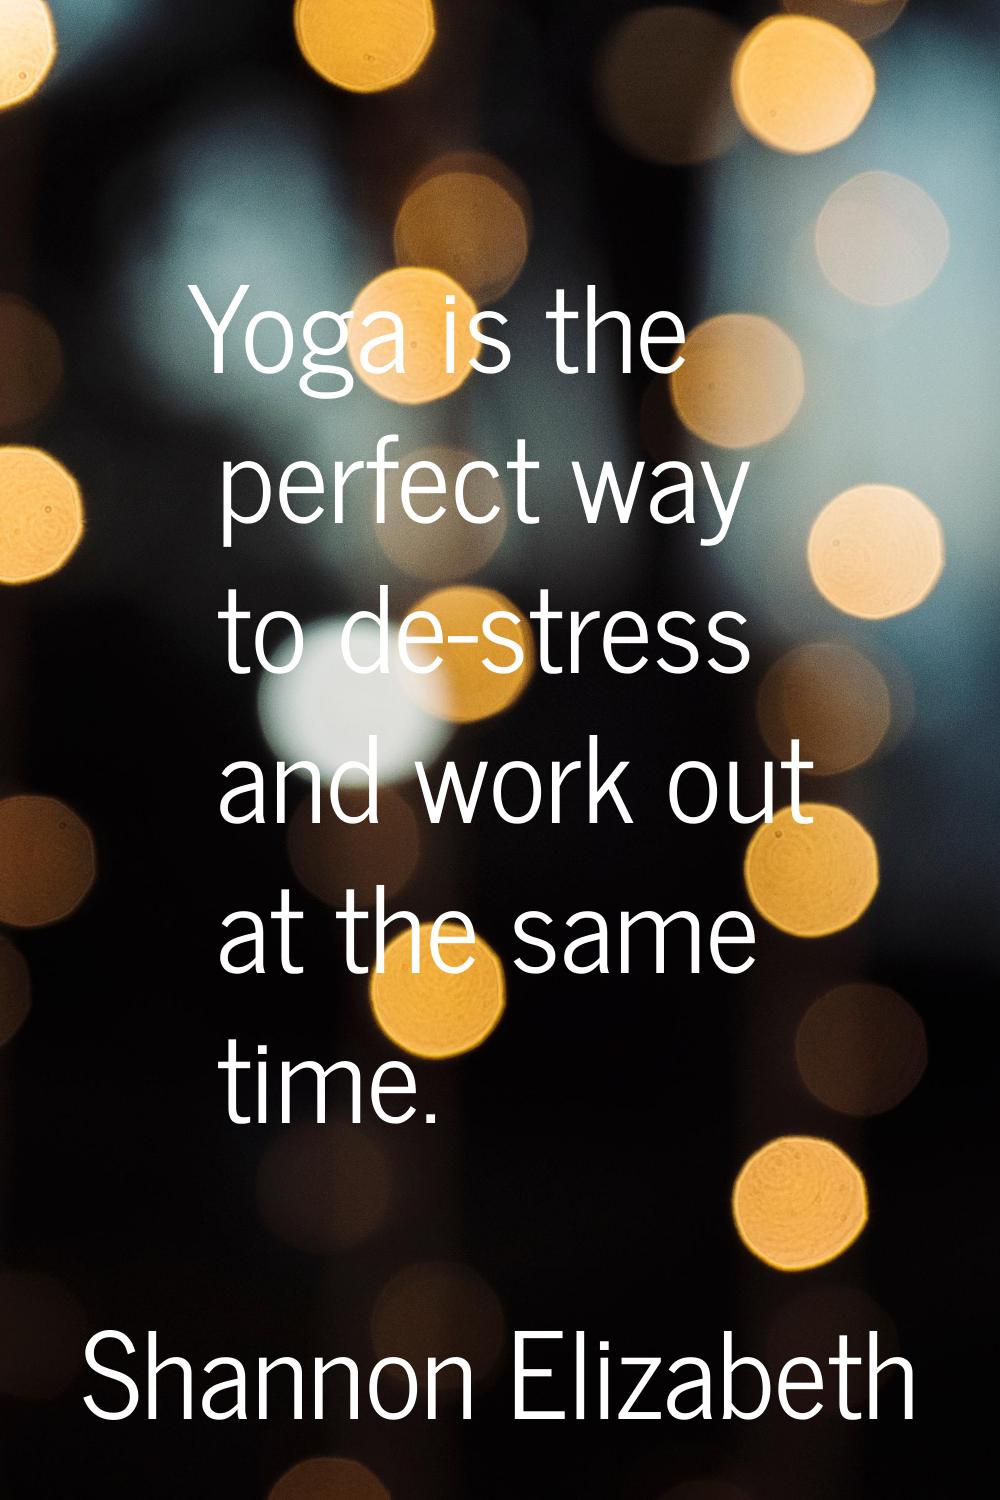 Yoga is the perfect way to de-stress and work out at the same time.